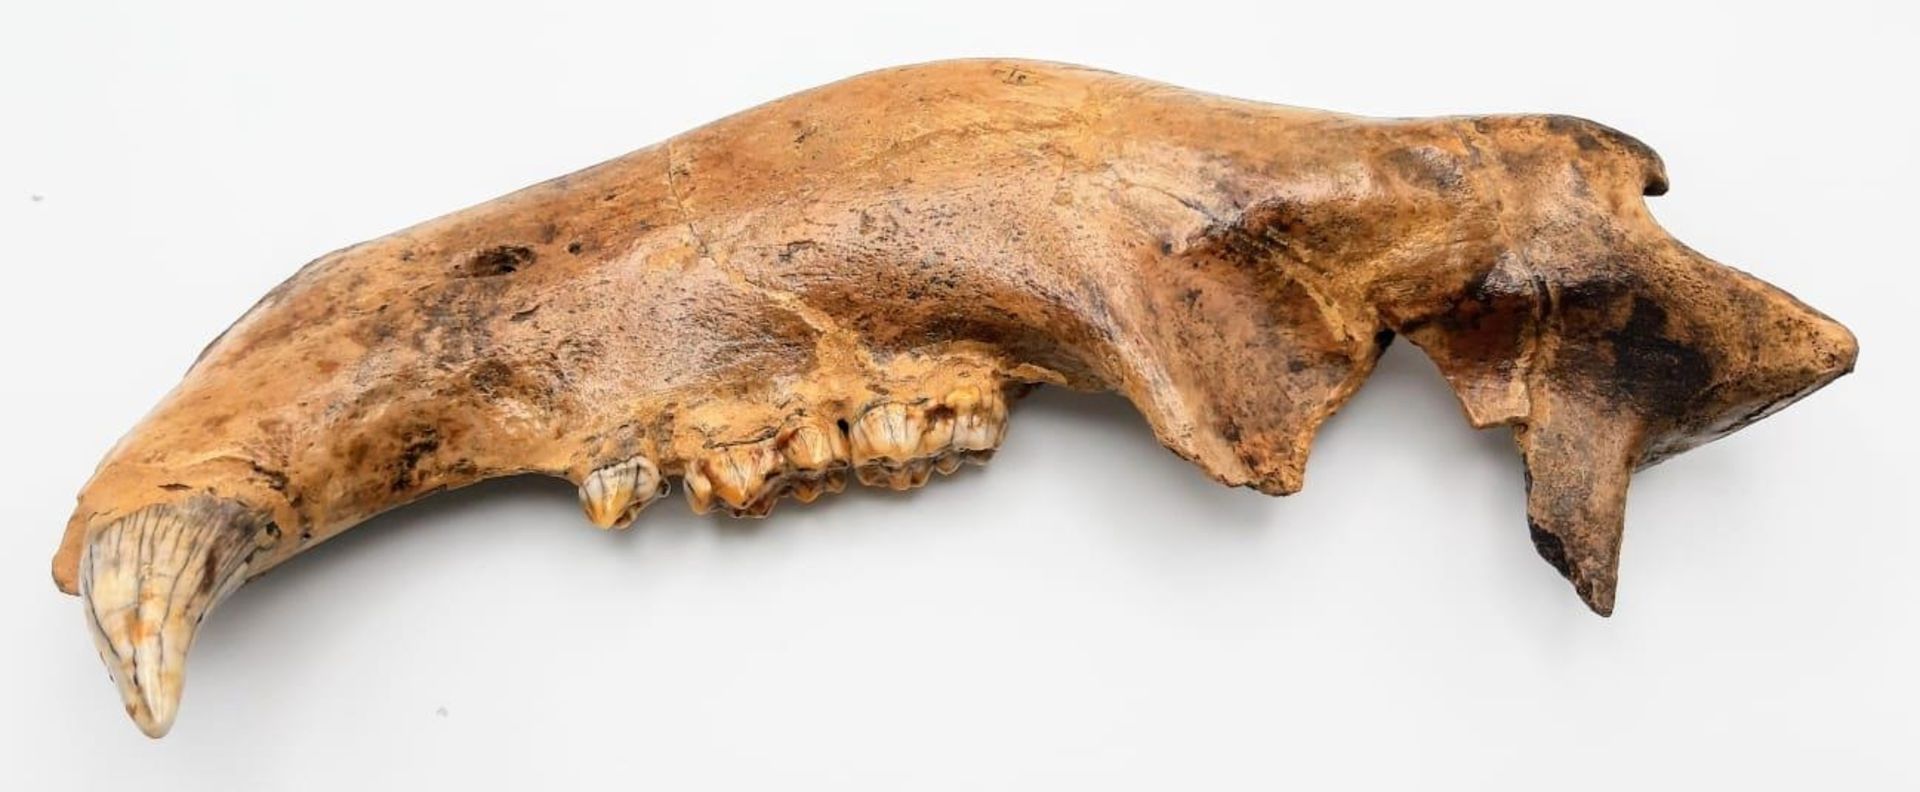 A spectacular, jaw with teeth of Ursus spelaeus (Cave bear), a prehistoric species that lived in